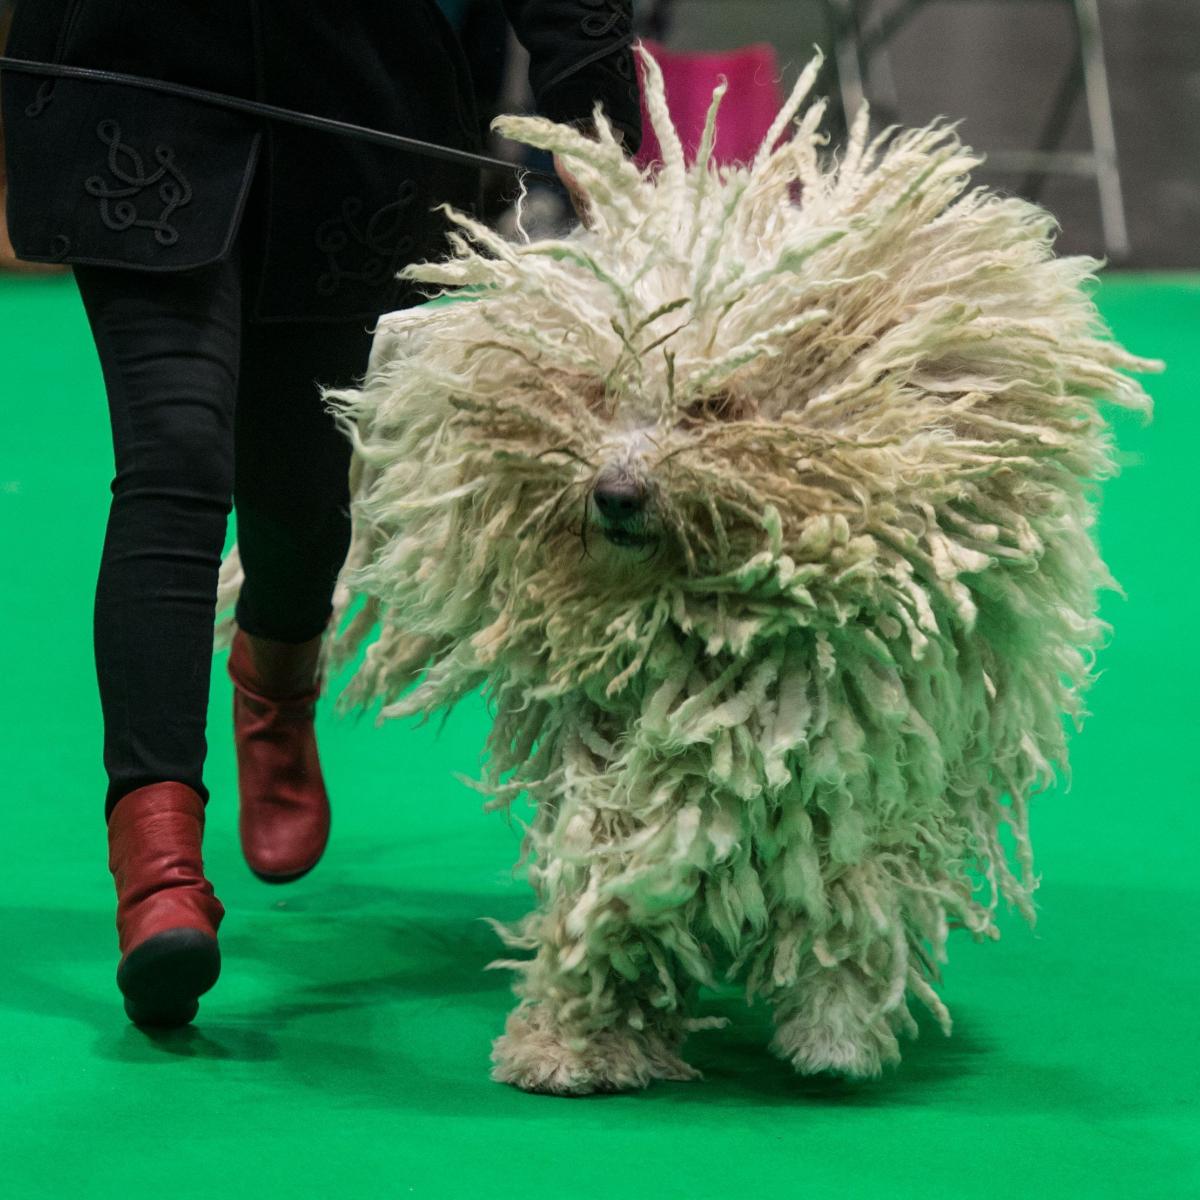 Crufts Dog Show Results 2019 Saturday Winners, Updated Schedule and TV